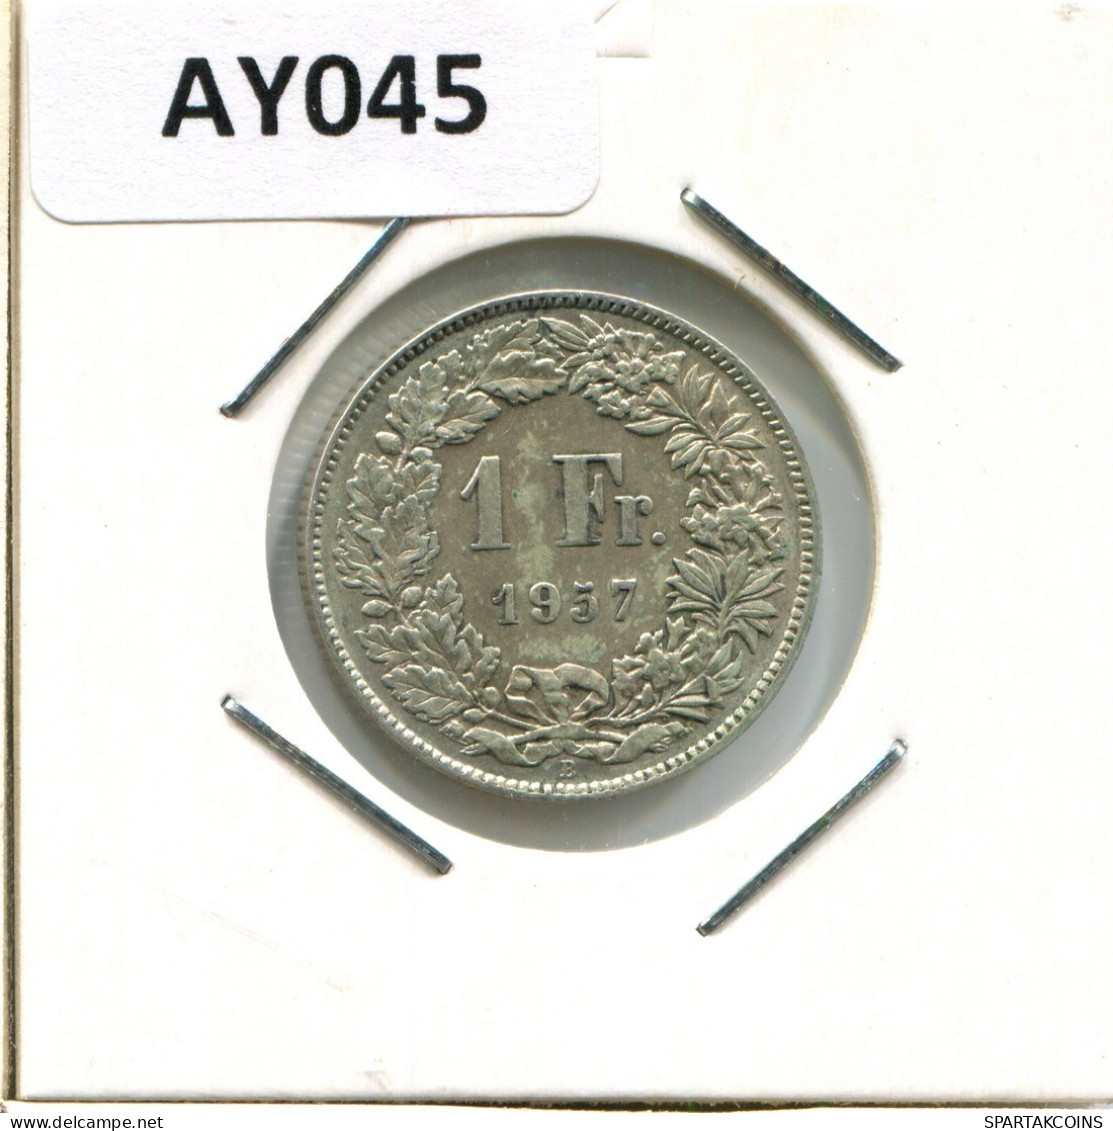 1 FRANC 1957 B SUISSE SWITZERLAND Pièce ARGENT #AY045.3.F.A - Other & Unclassified